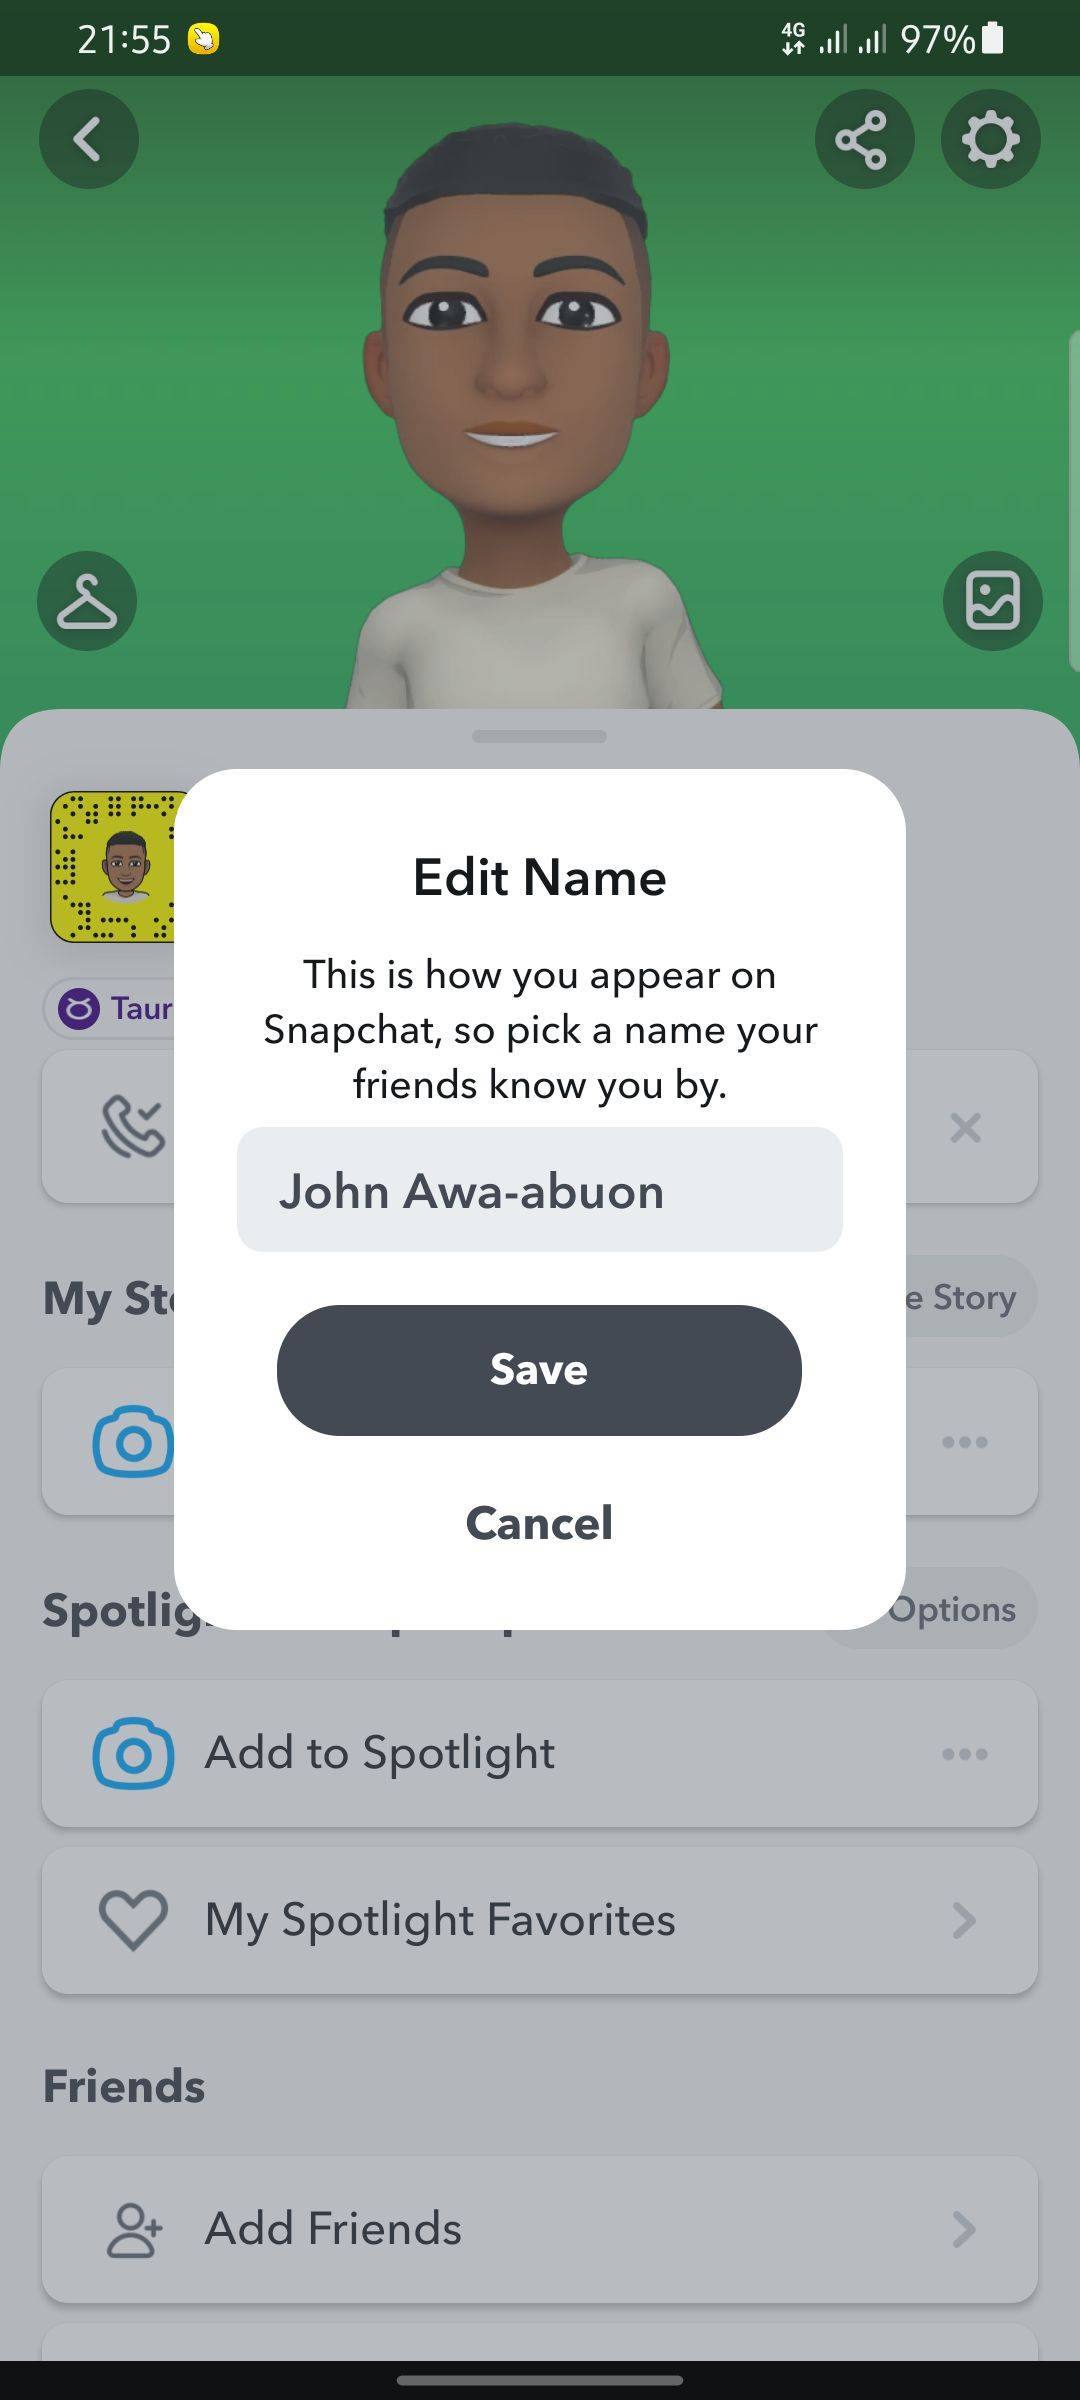 7 Life-Saving Recommendations On Snapchat Followers